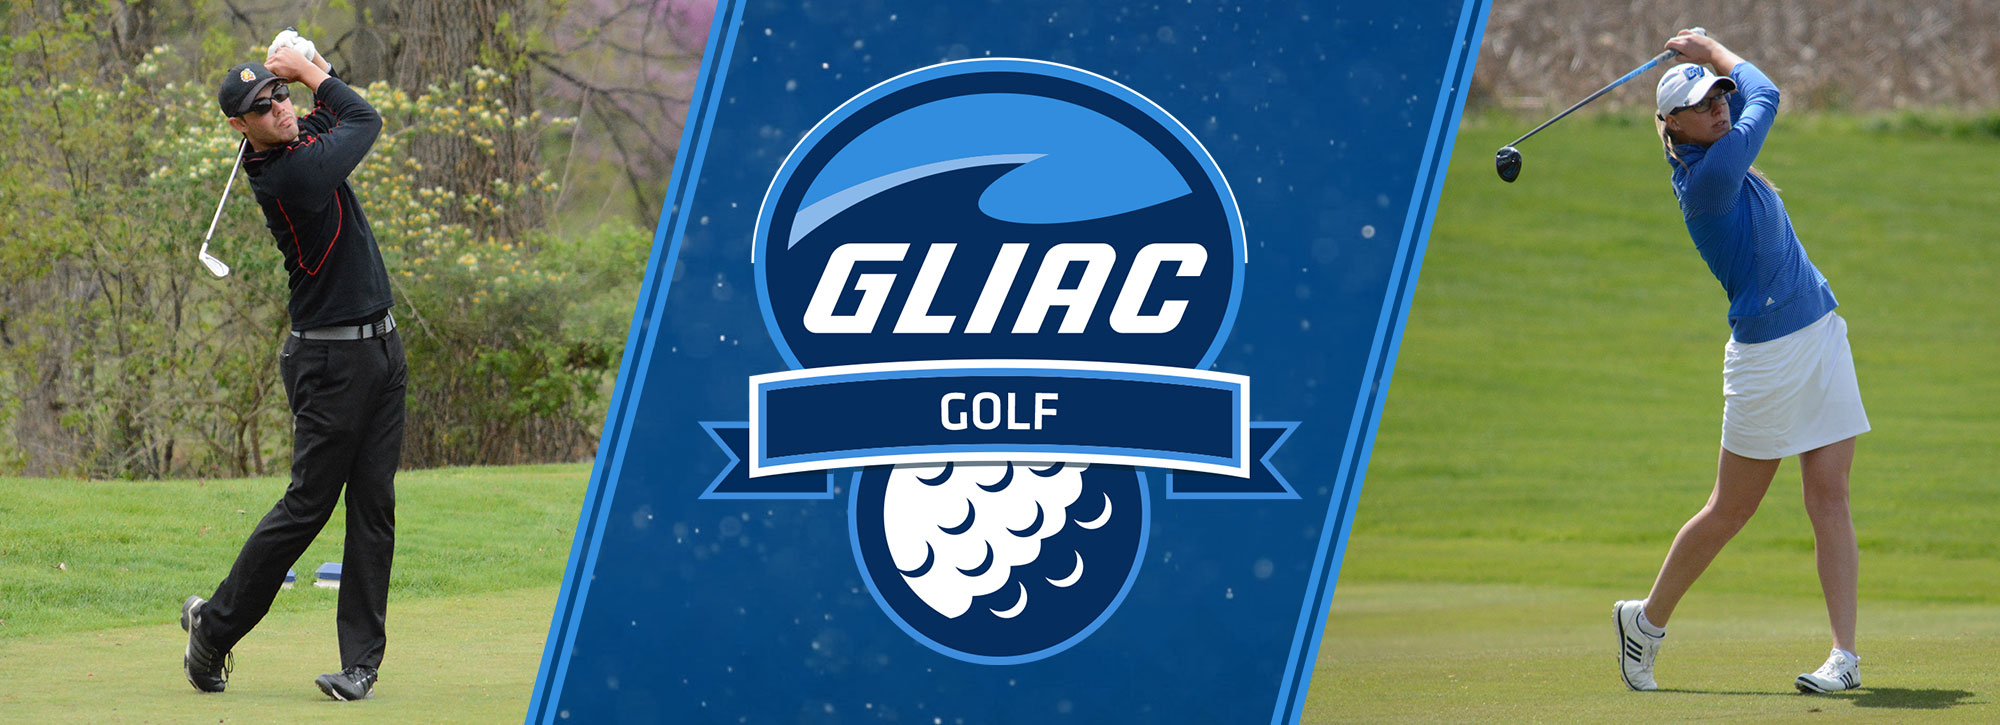 Ferris State's Weller, Grand Valley State's Chipman Selected GLIAC Golfers of the Week